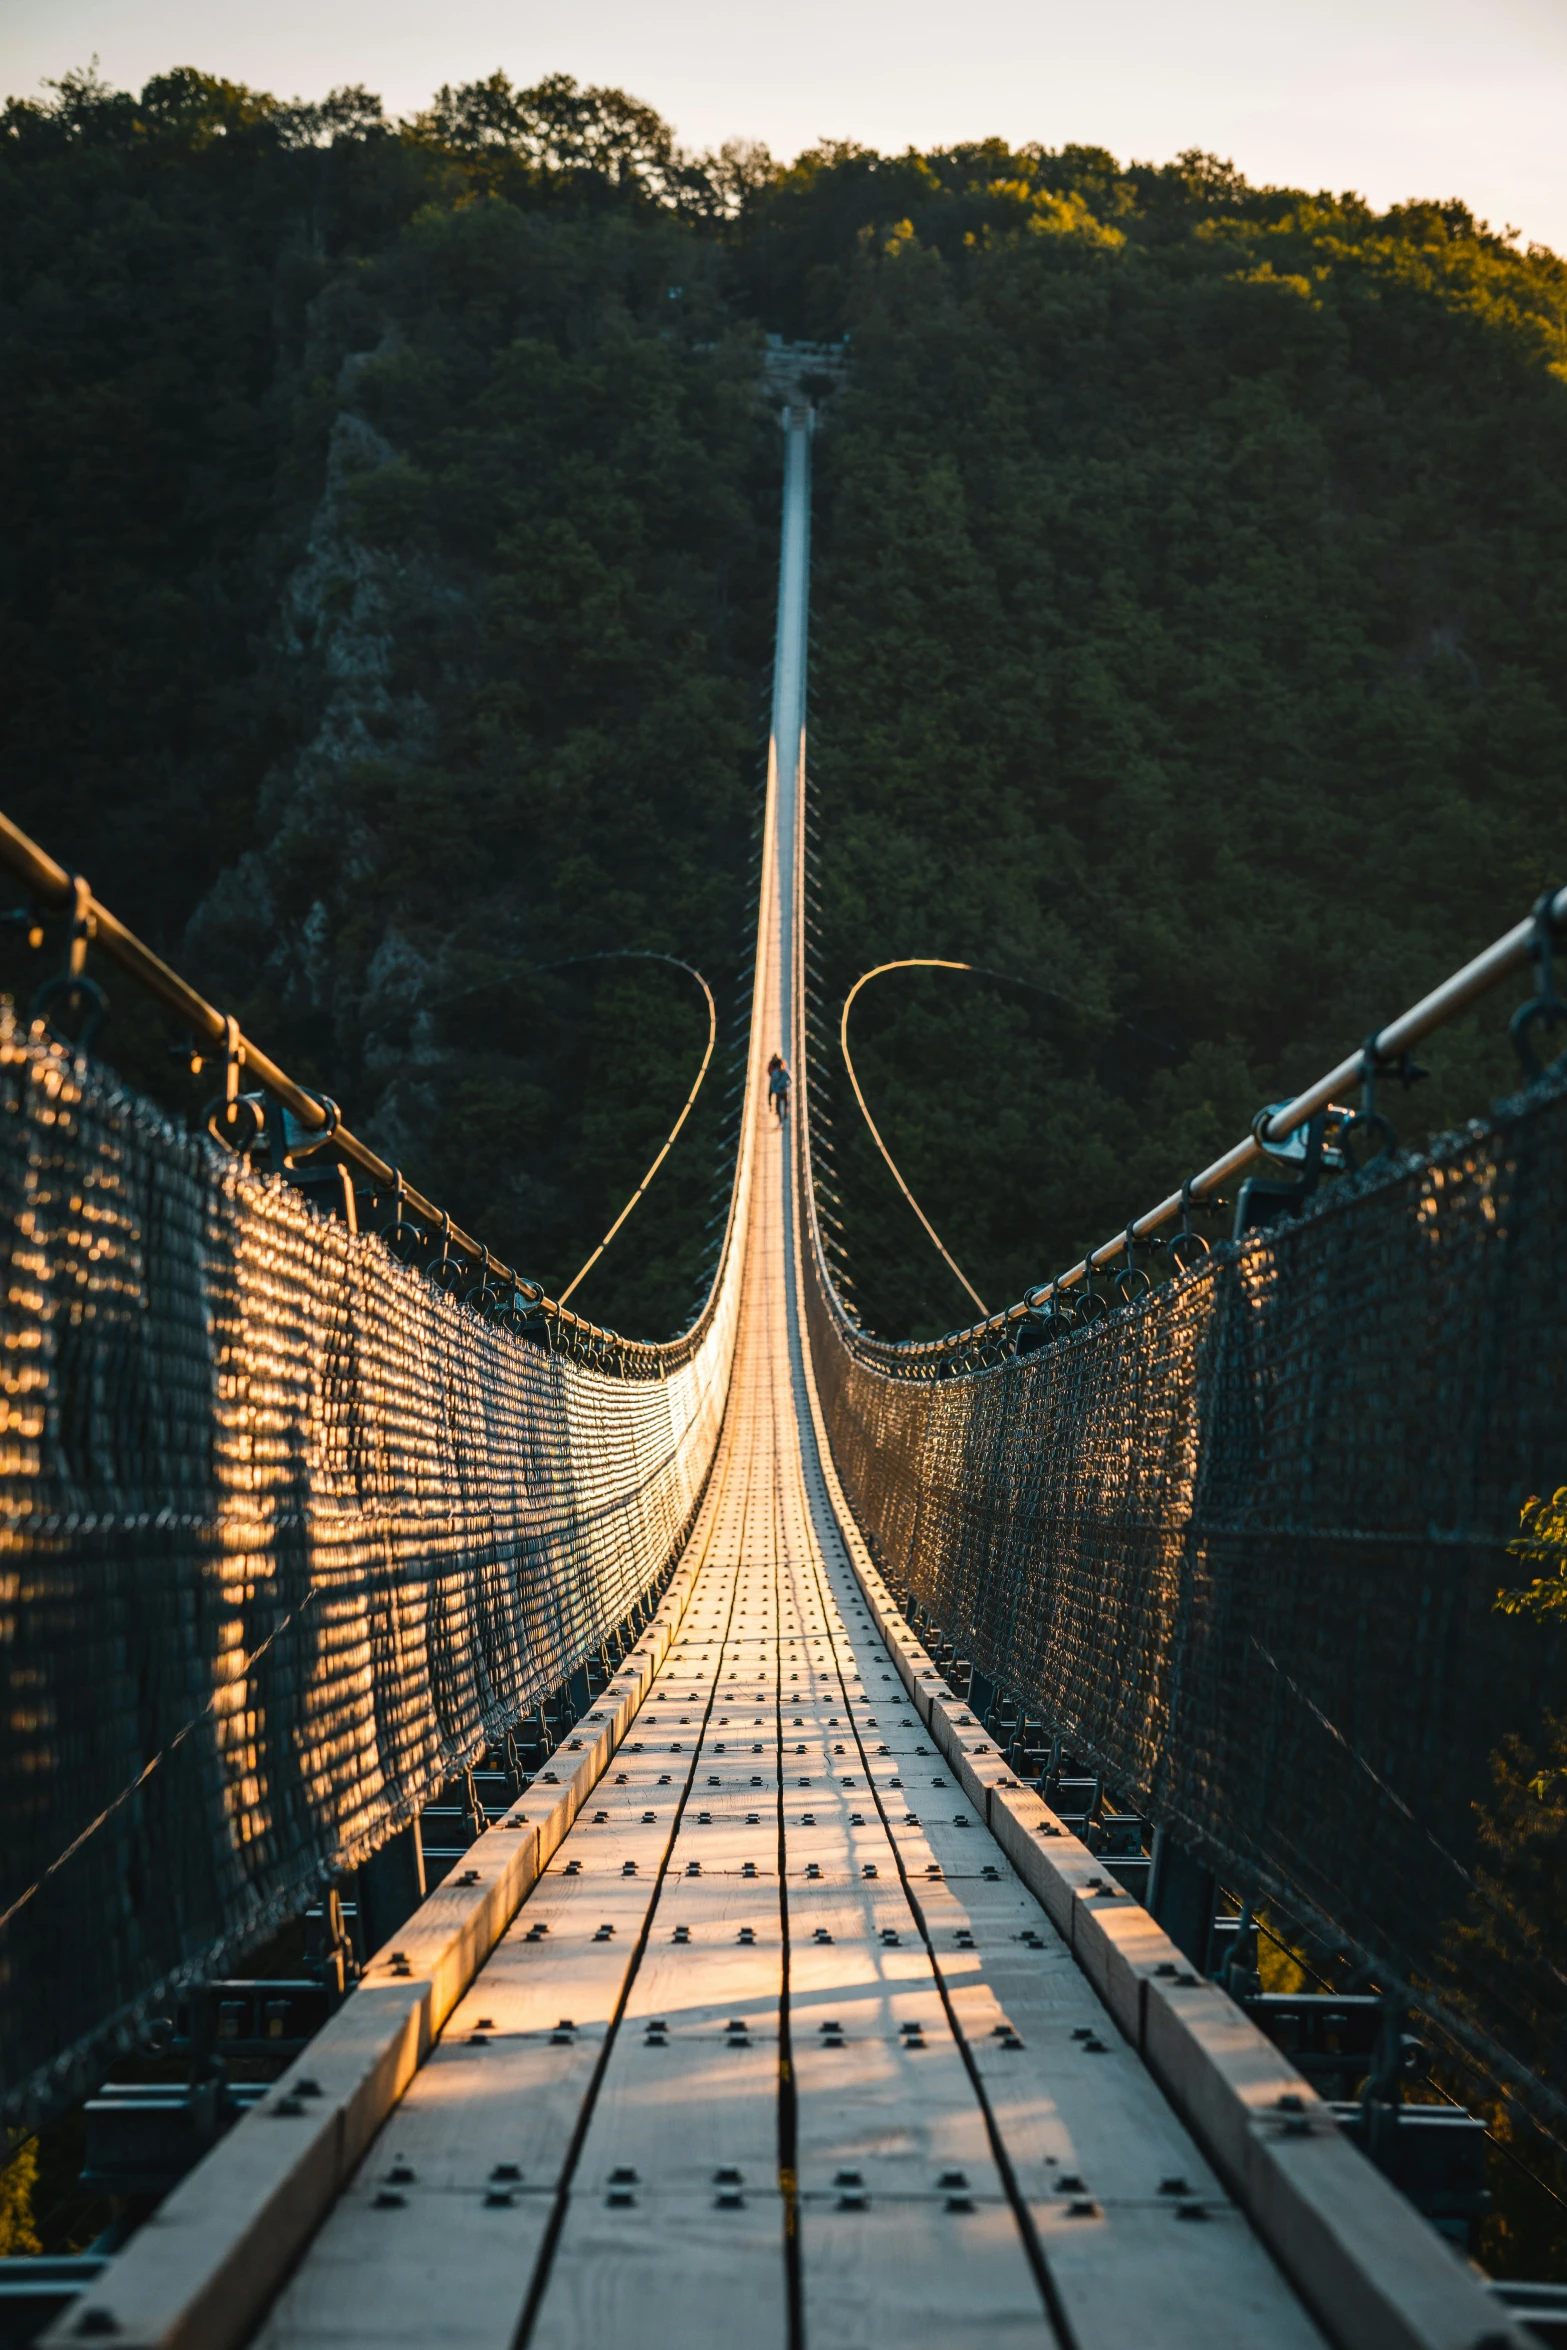 a long suspension bridge crossing over a mountain side